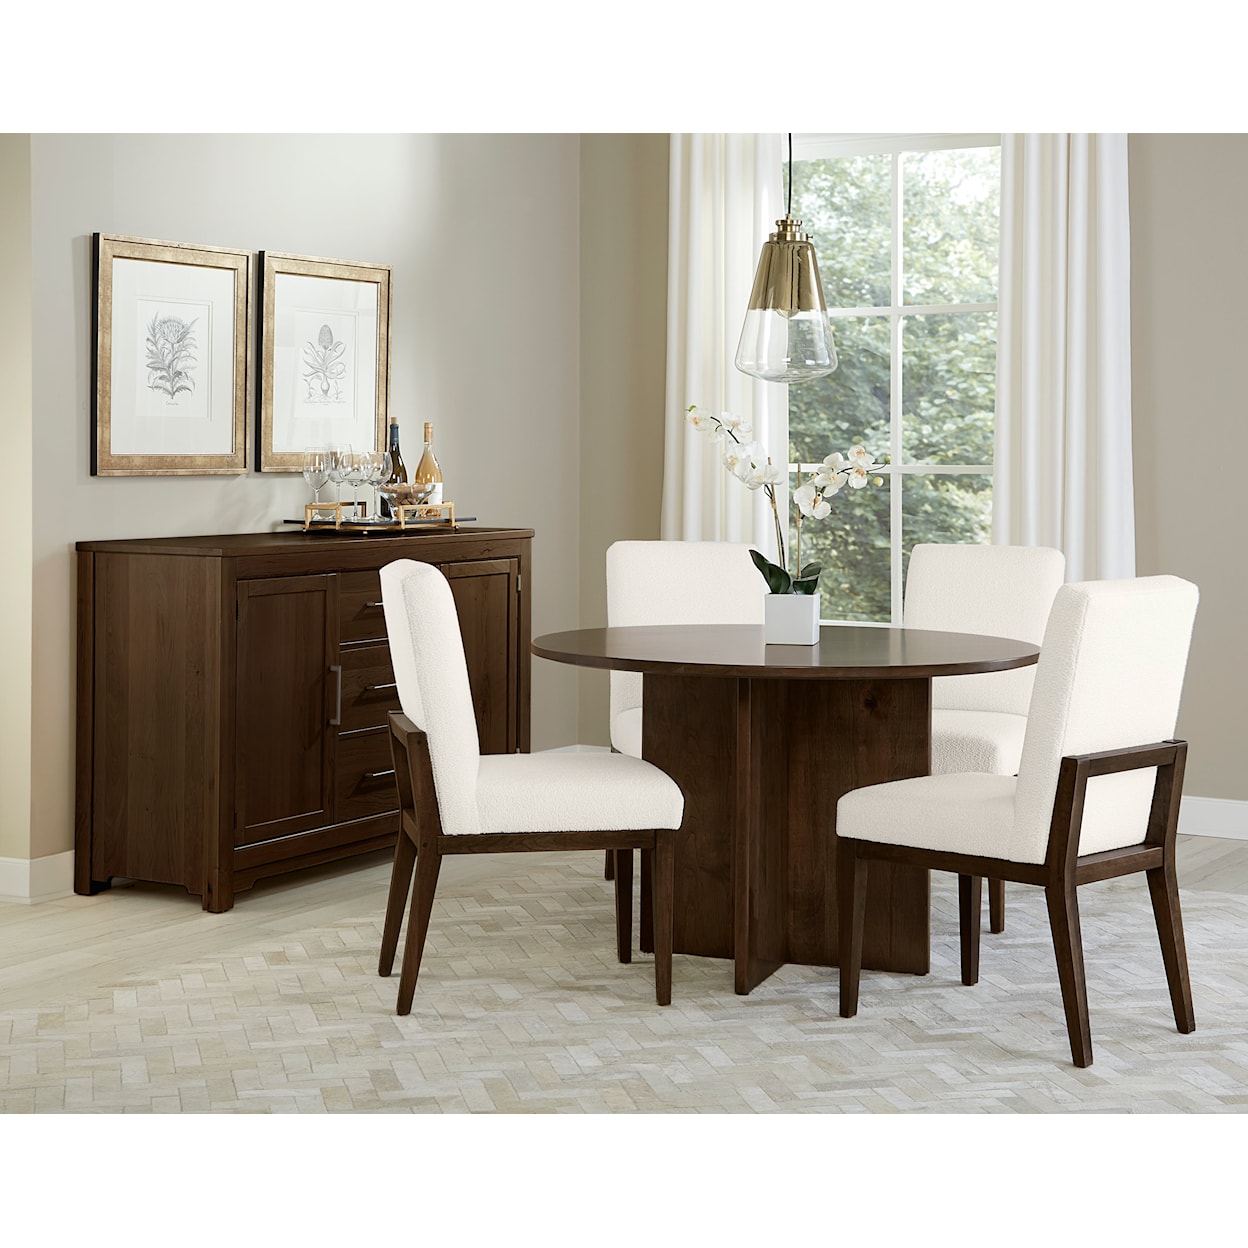 Virginia House Crafted Cherry - Dark Round Dining Table